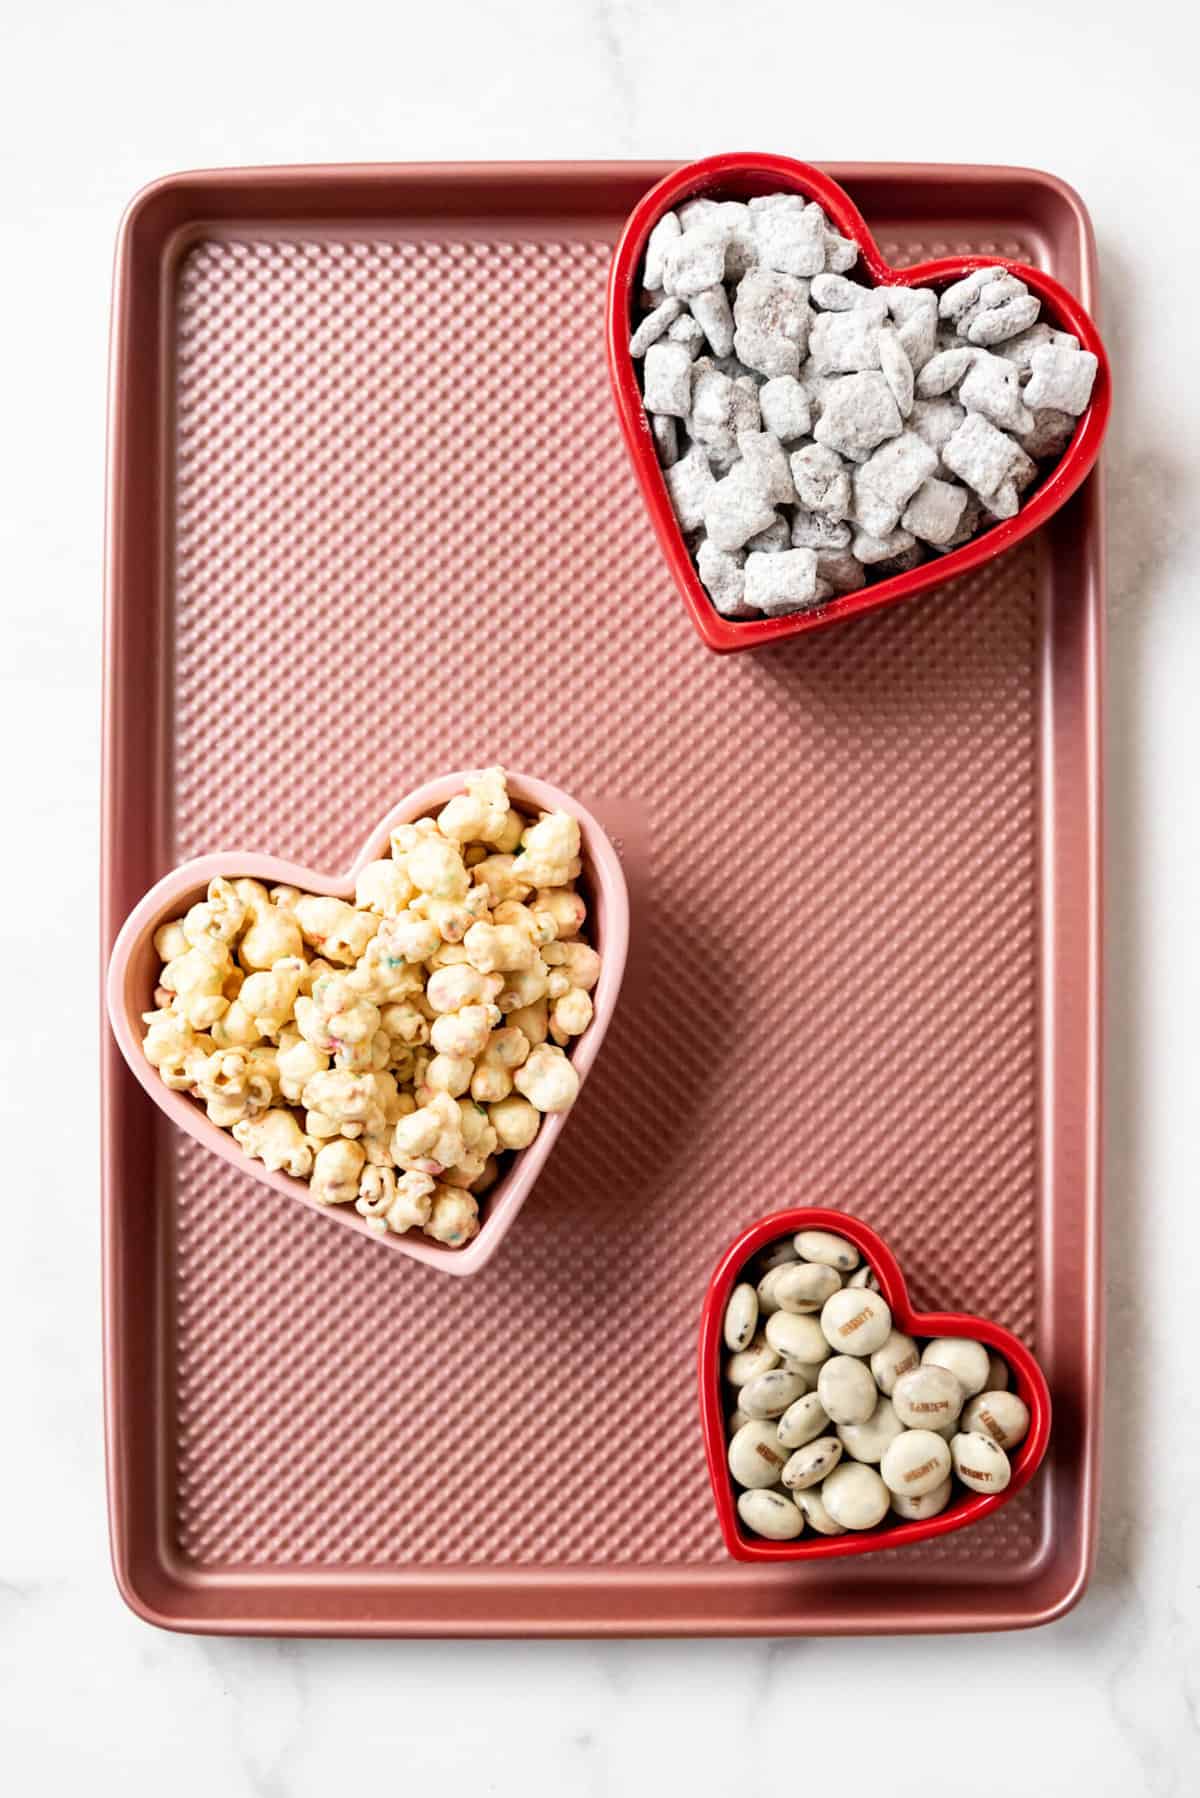 Heart shaped bowls filled with candy, popcorn, and chex mix muddy buddies on a pink baking sheet.